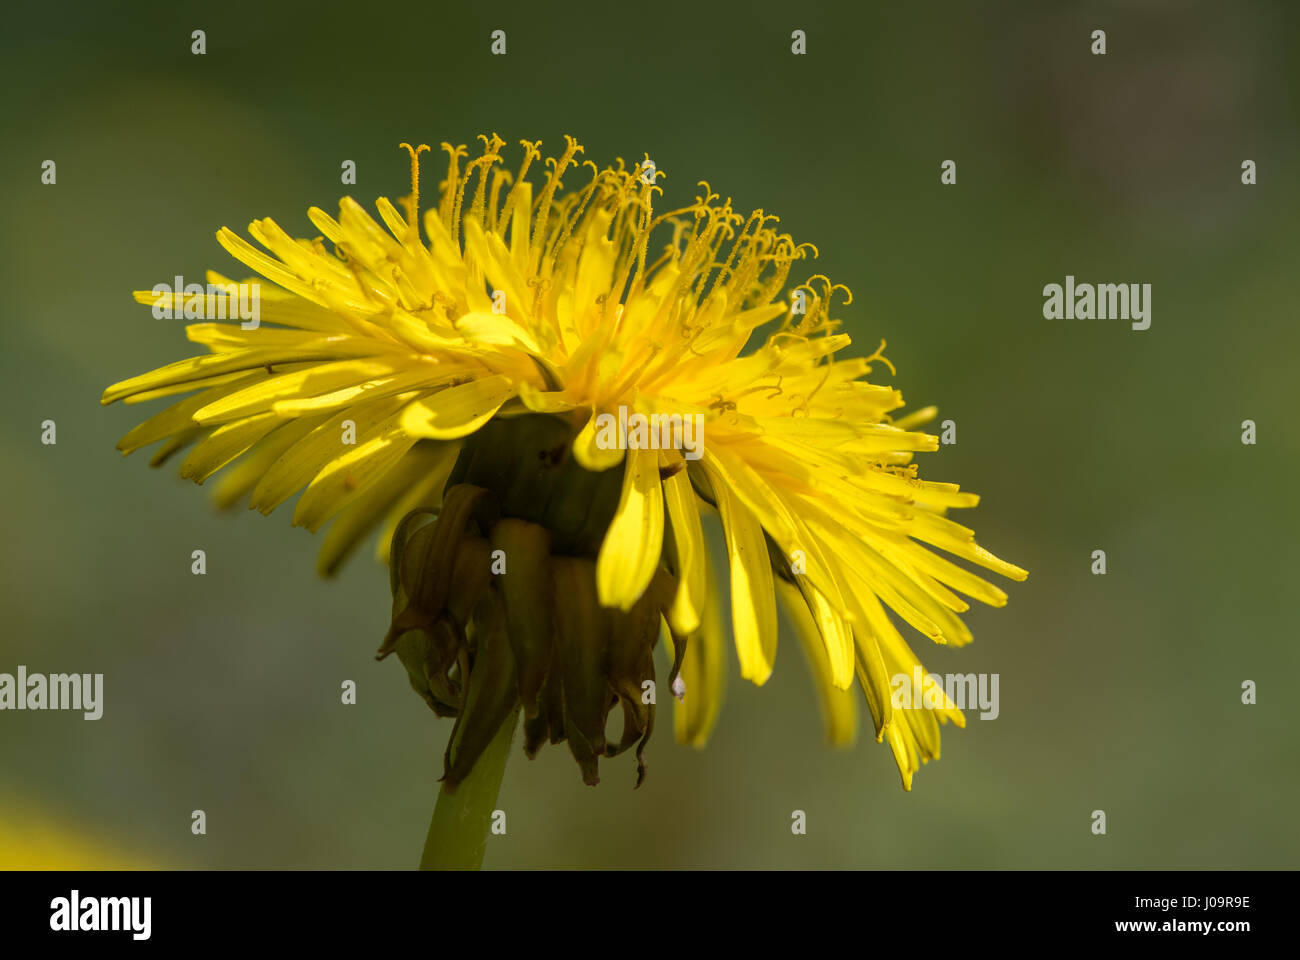 Dandelion (Taraxacum officinale agg.) flower showing stamens Close up of common yellow plant in the daisy family (Asteraceae) Stock Photo